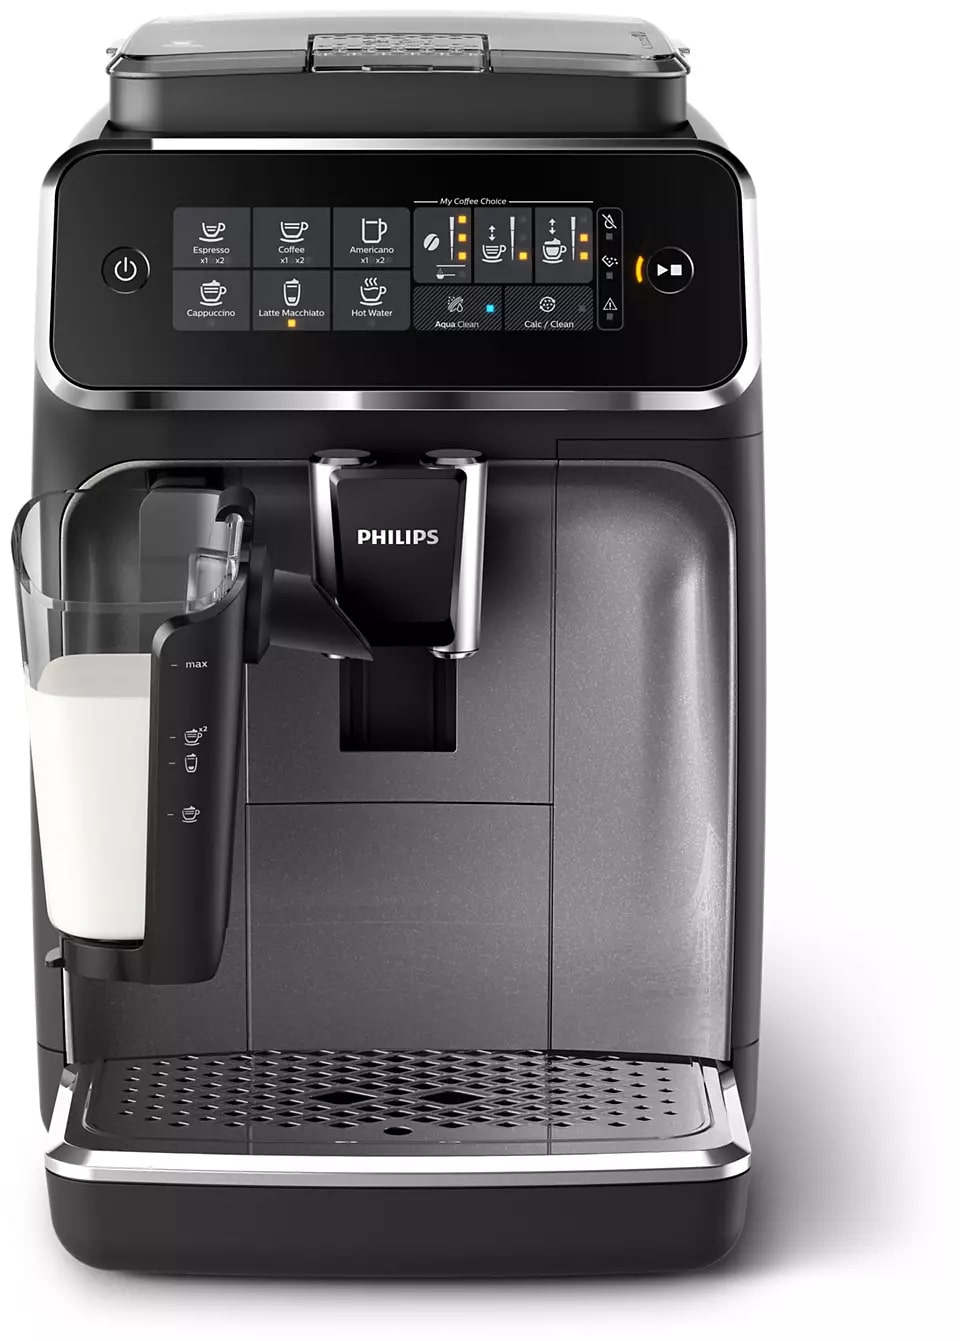 Philips espresso machine with multiple coffee options